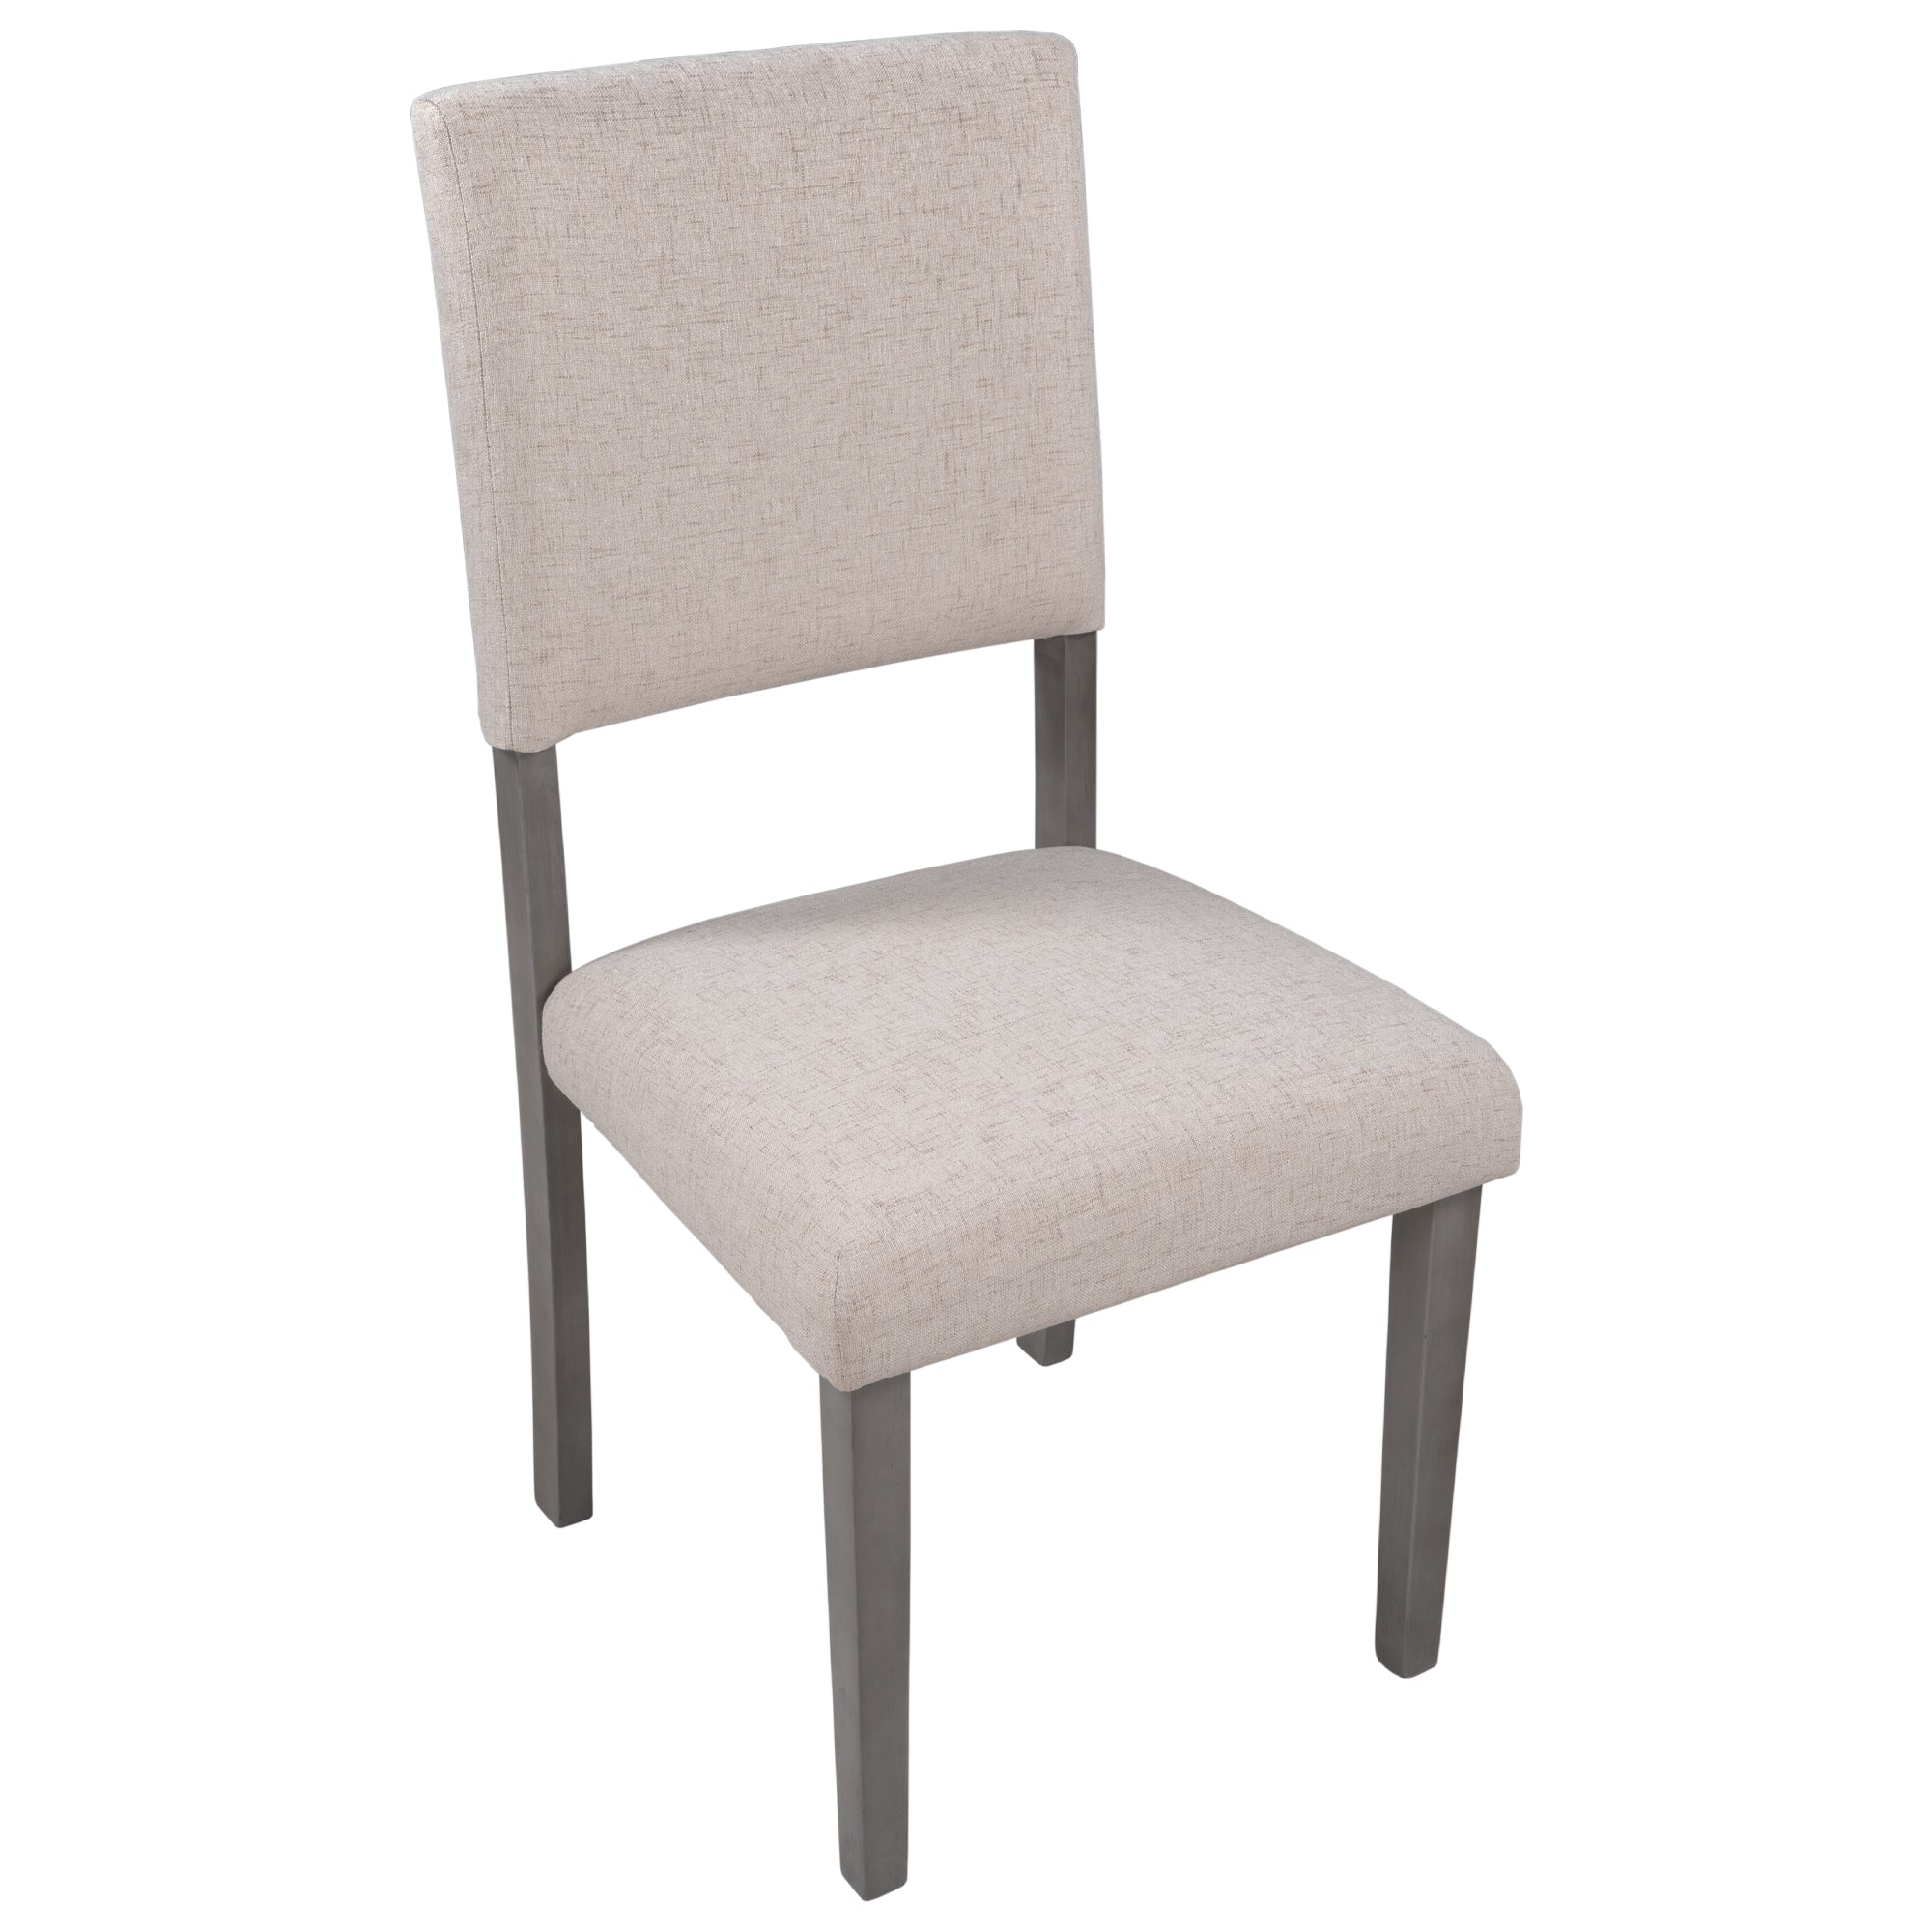 Mid-Century Wood 4 Upholstered Dining Chairs for Small Places, Beige